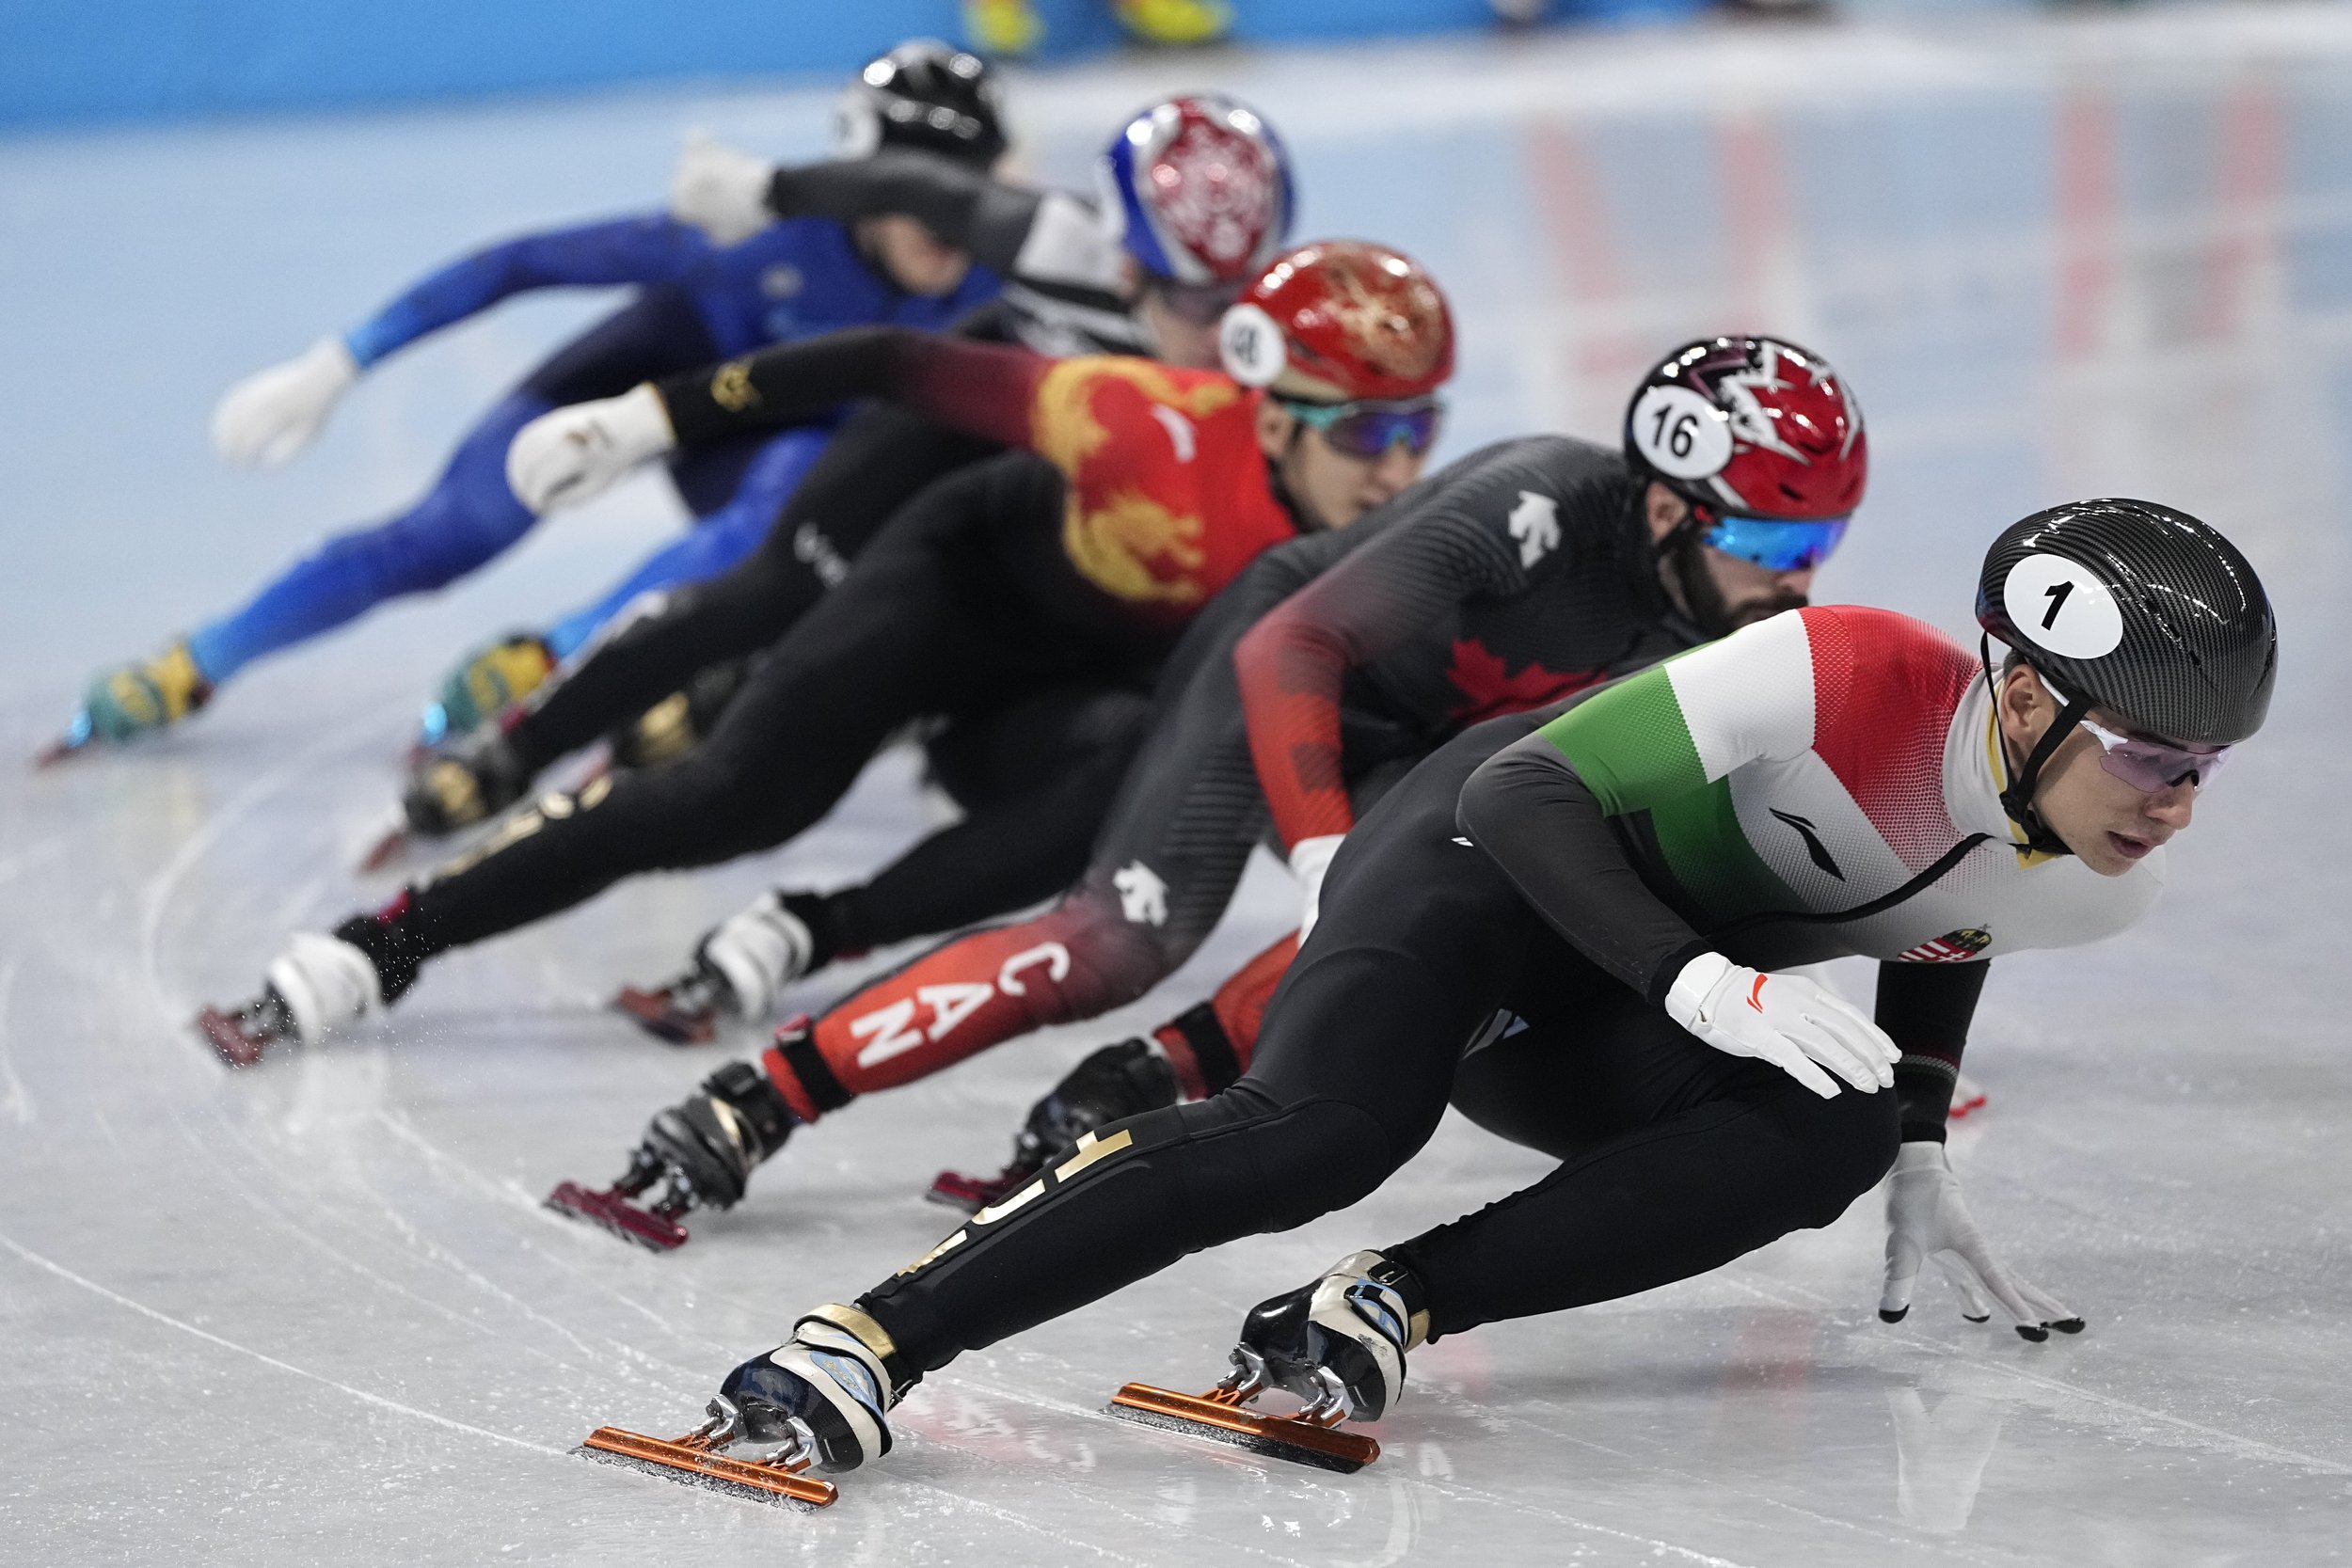  Liu Shaoang of Hungary, races in his men's 500-meters semifinal during the short track speedskating competition at the 2022 Winter Olympics, Sunday, Feb. 13, 2022, in Beijing. (AP Photo/David J. Phillip) 